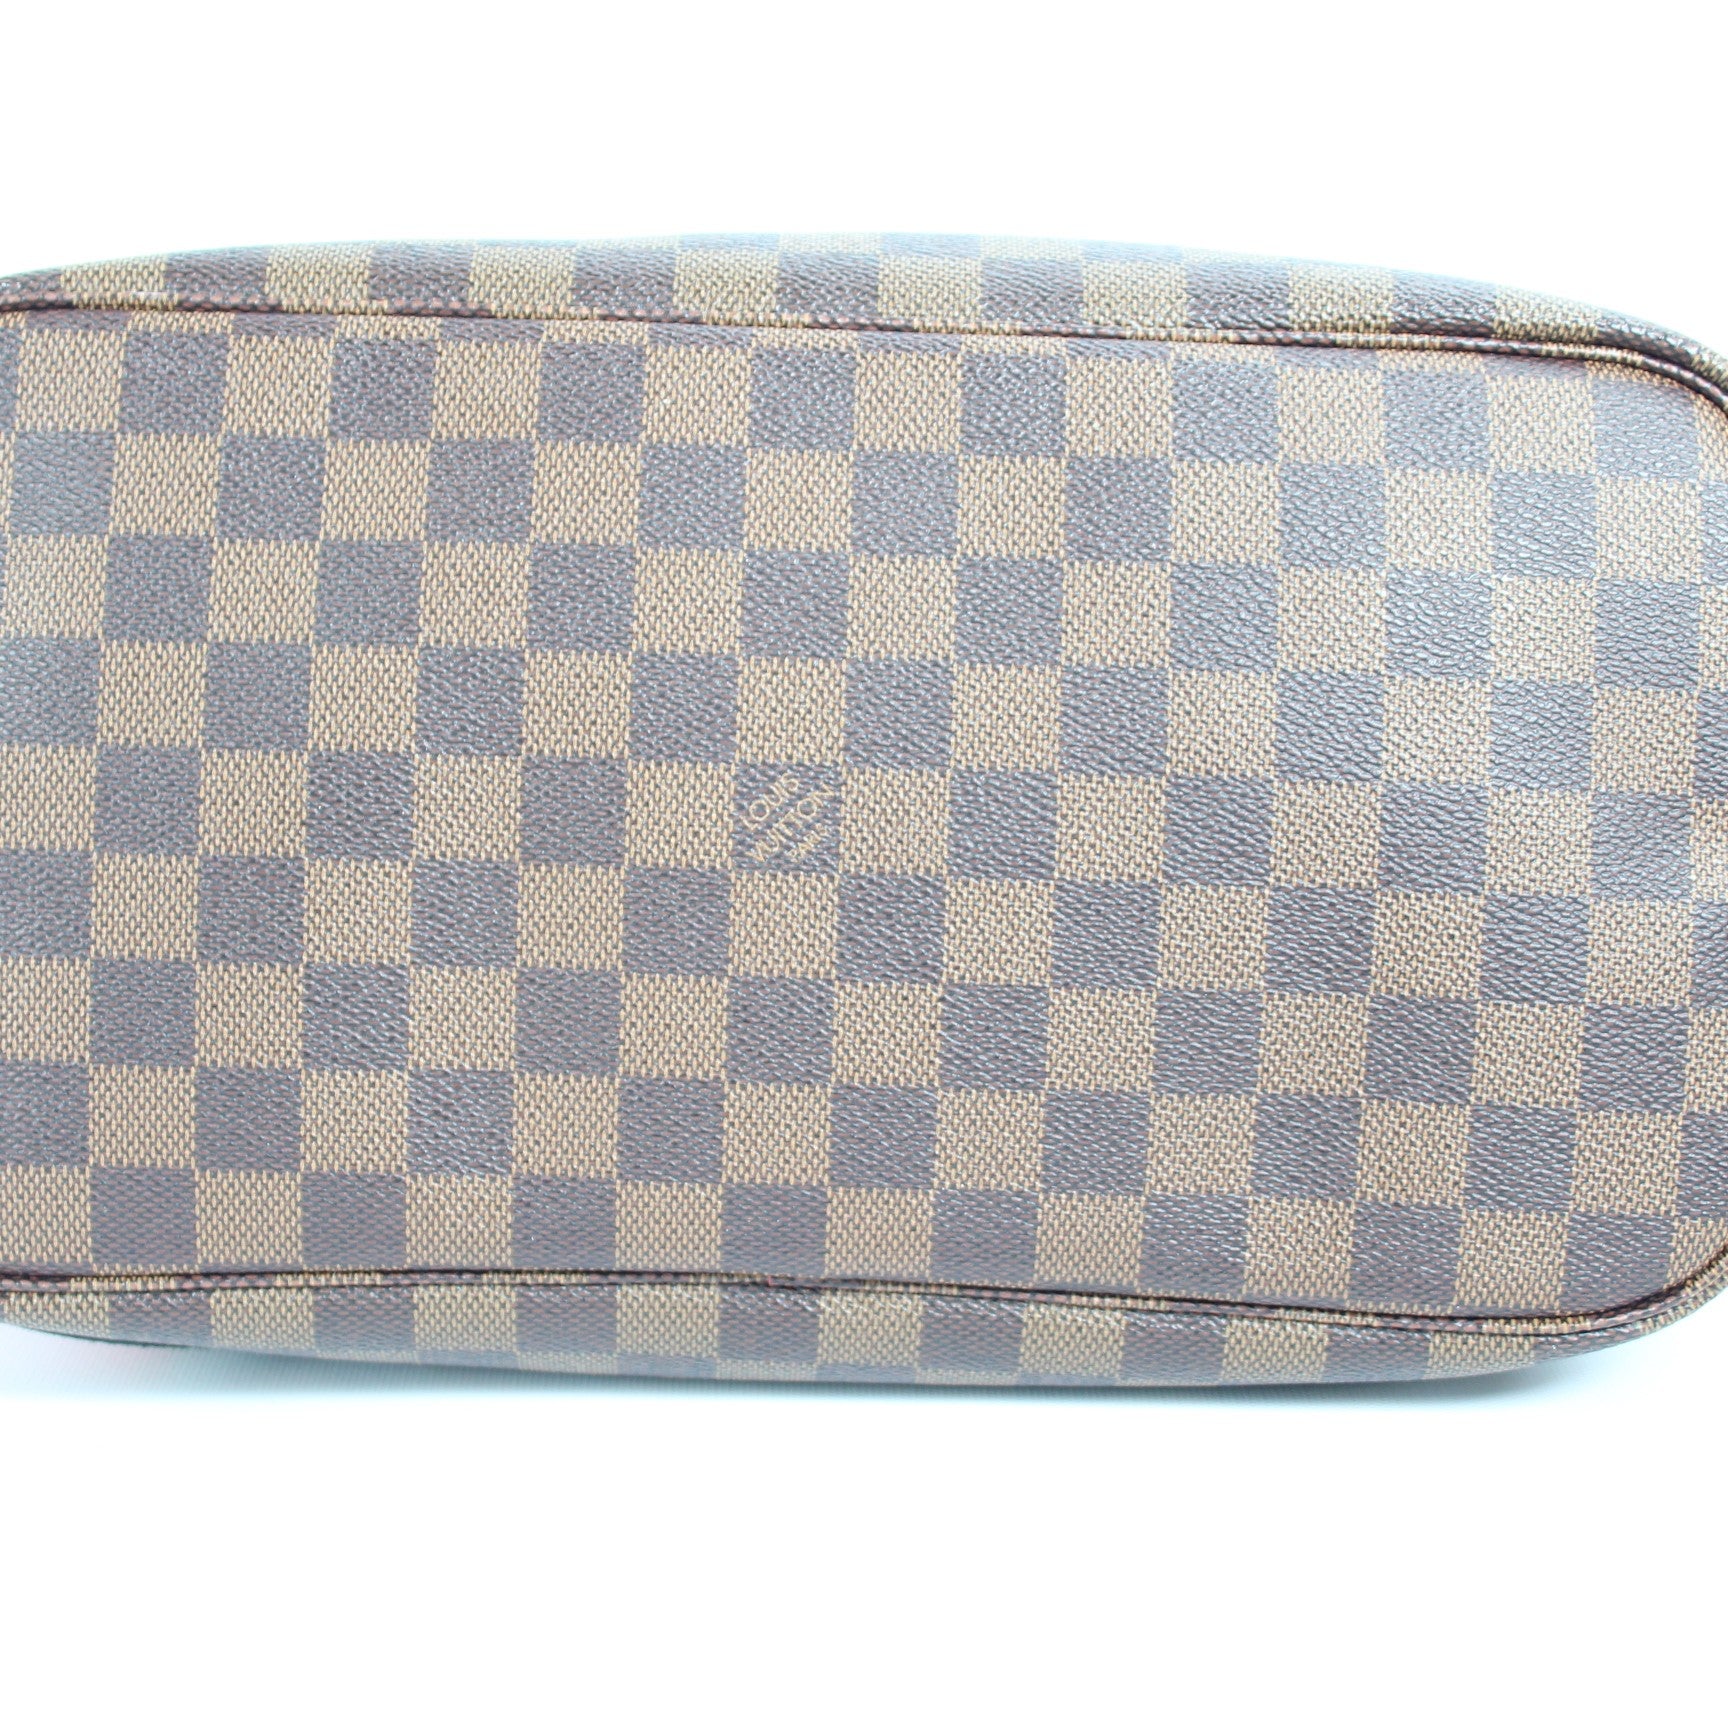 AUTH LOUIS VUITTON PATCHES STORIES LIMITED DAMIER EBENE CANVAS NEVERFULL MM  BAG 